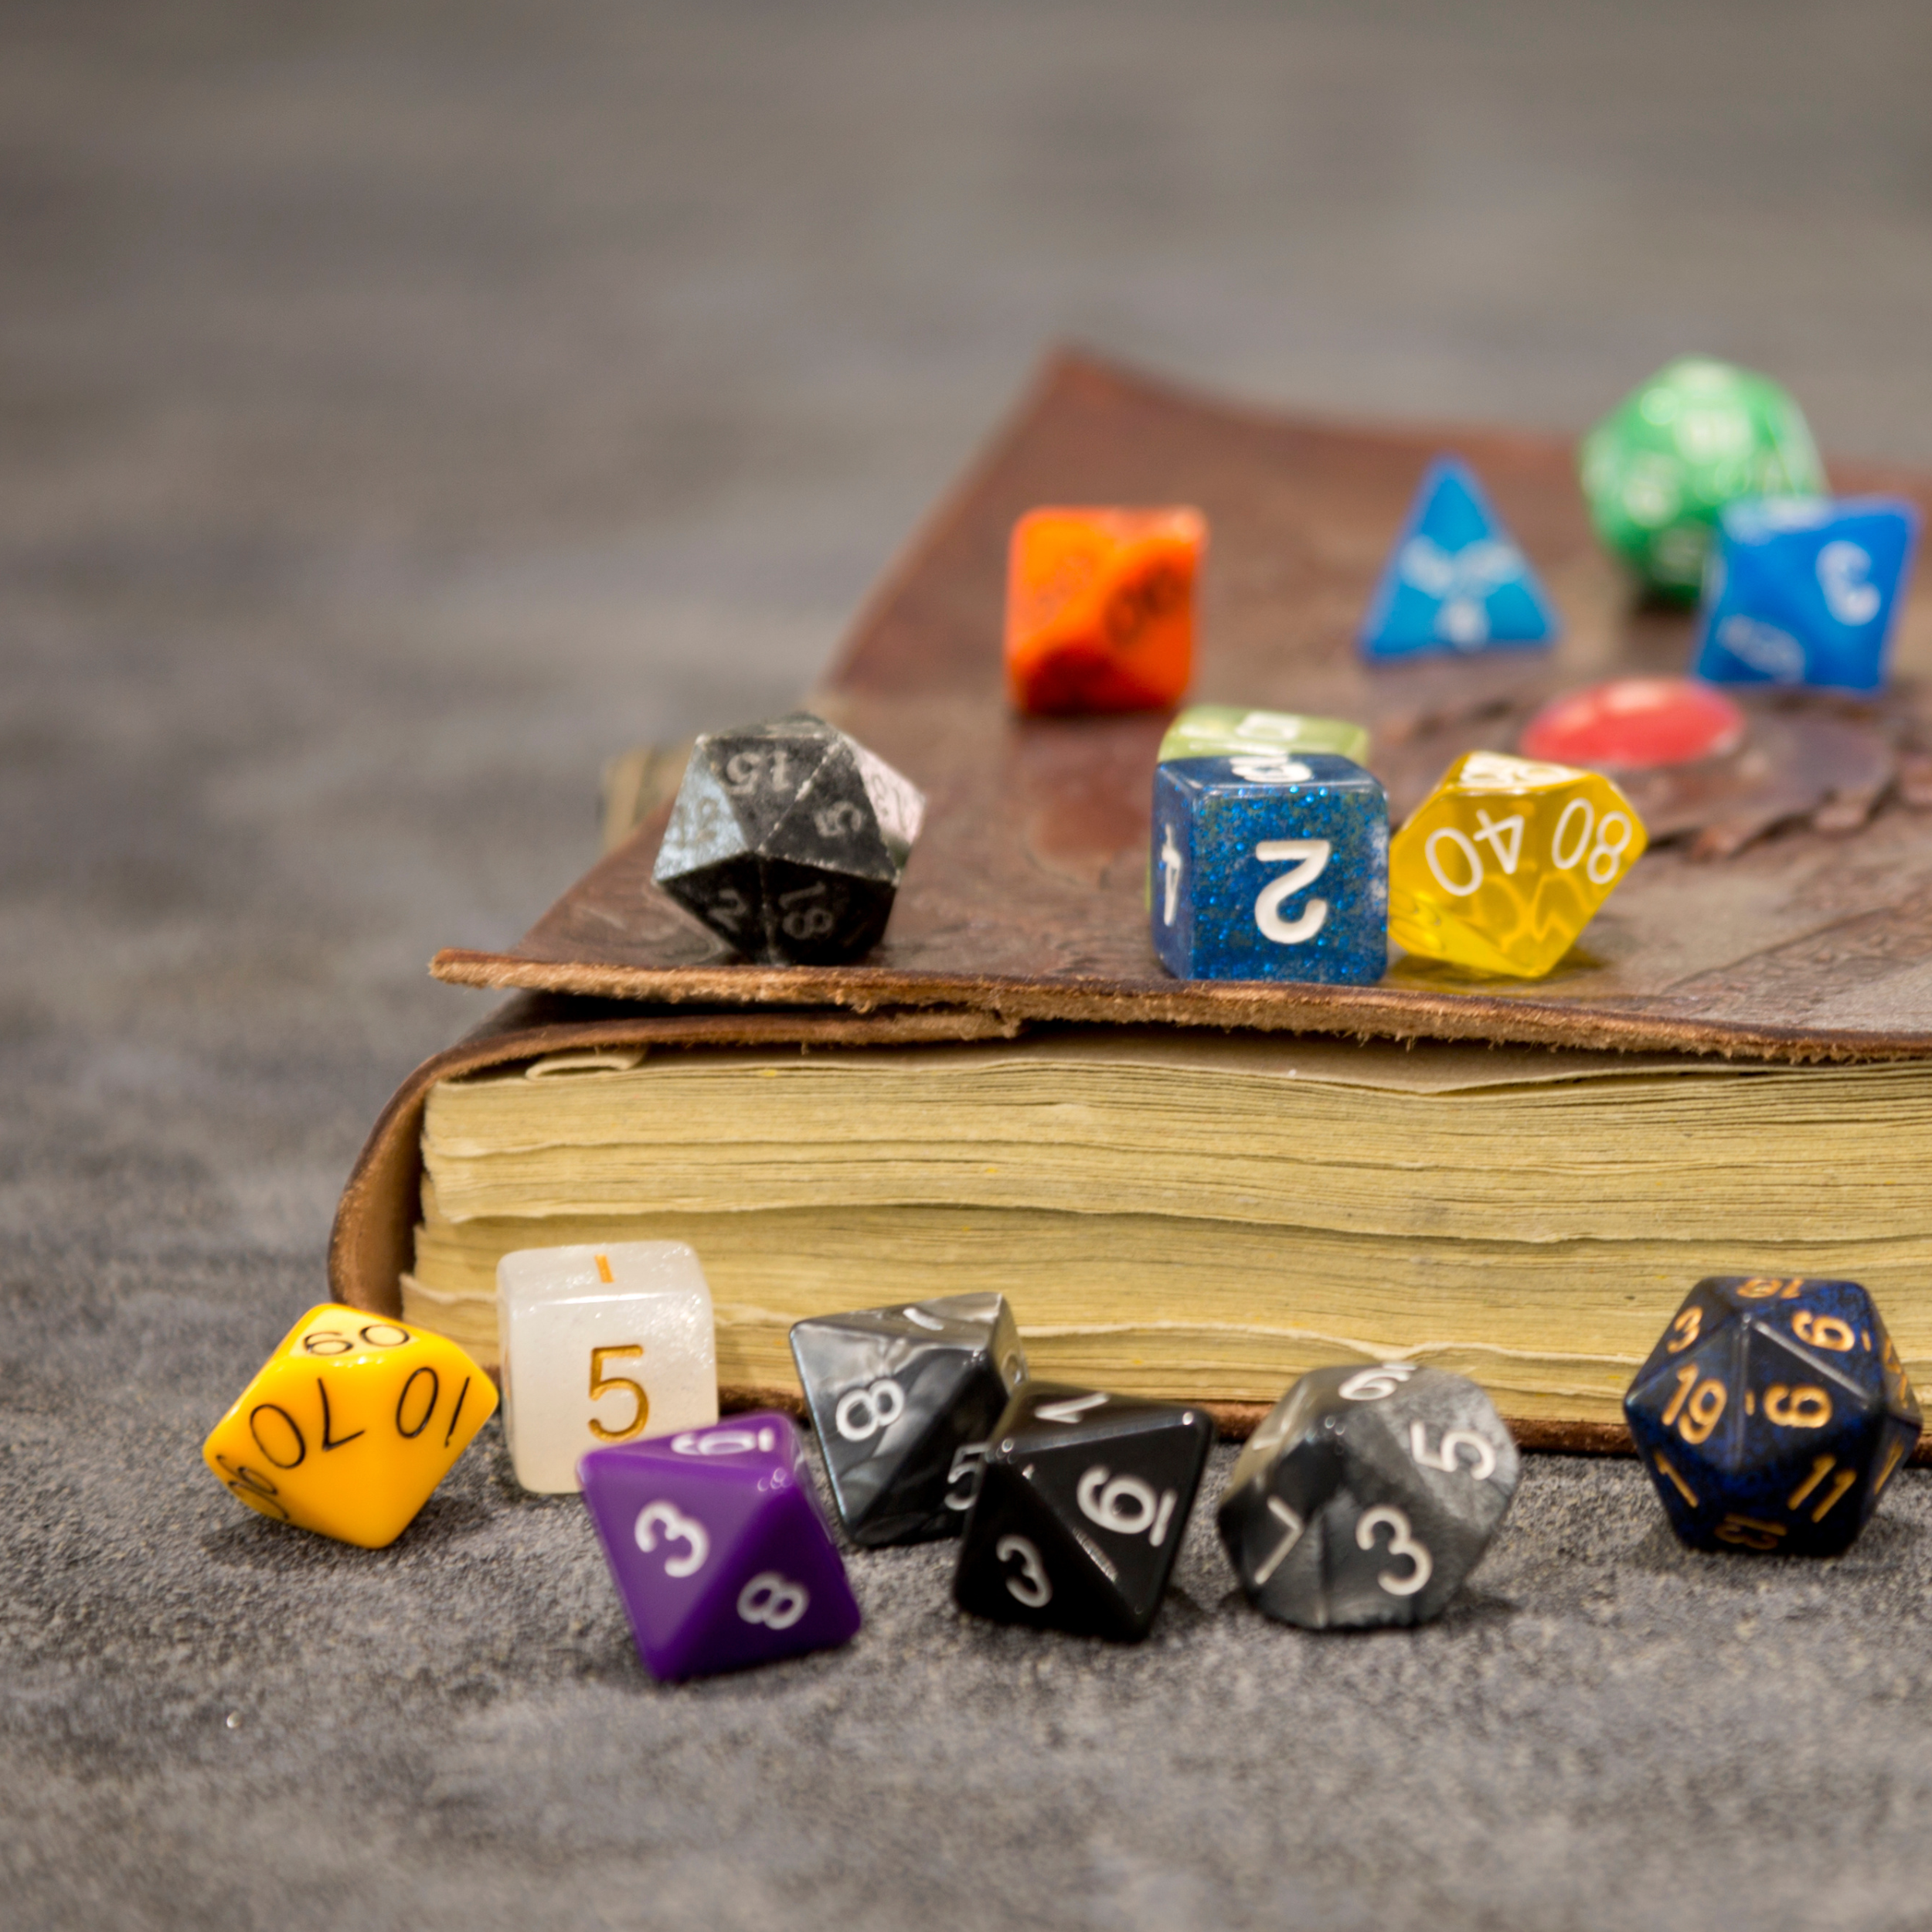 Tabletop role playing game supplies. Notebook and several dice with different quantities of sides and colors